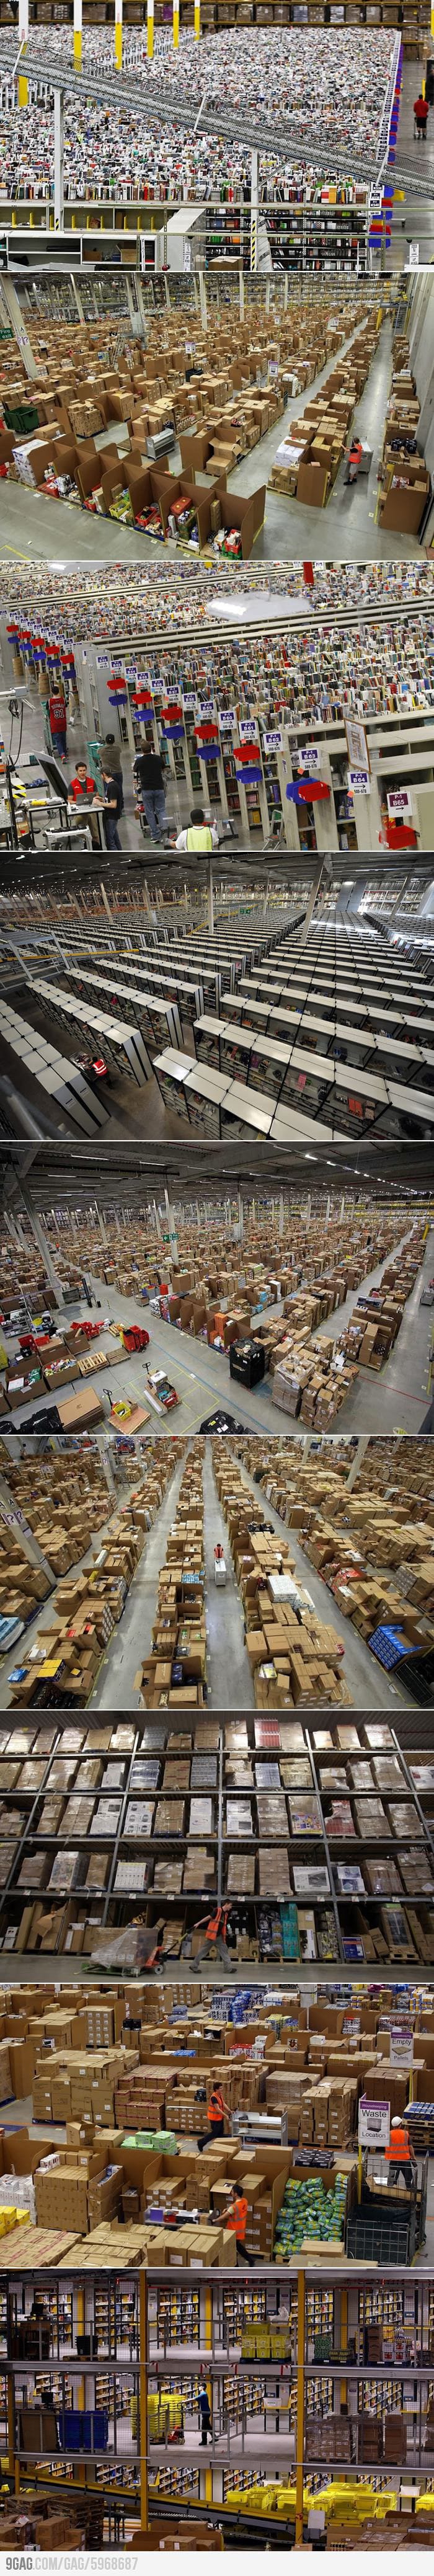 This Is What It Looks Like Inside An Amazon Warehouse